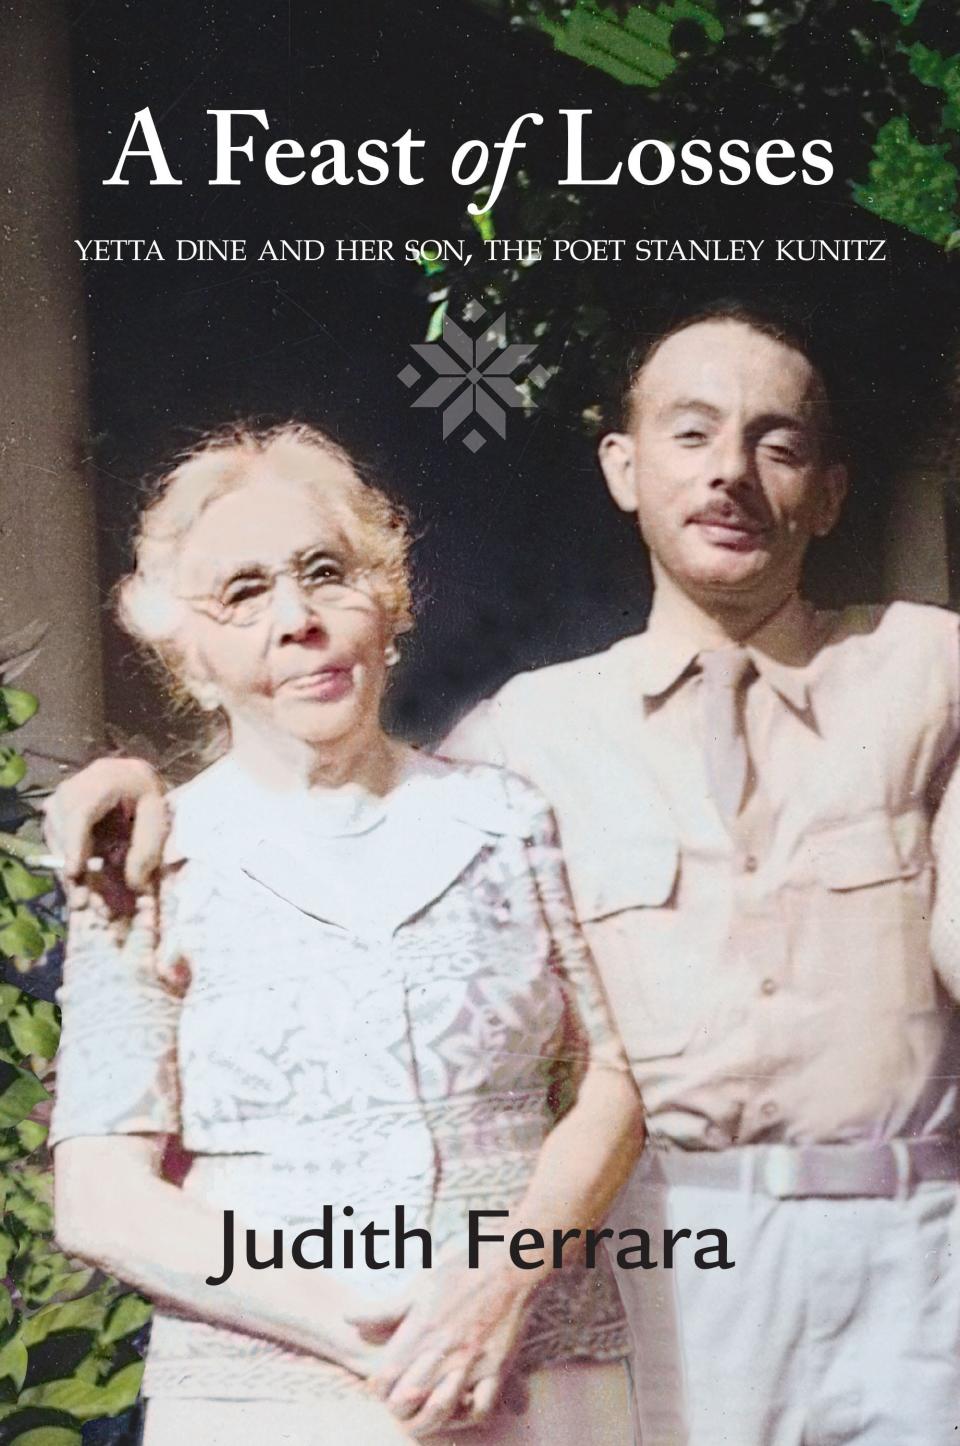 The cover of "A Feast of Losses: Yetta Dine and her son, the poet Stanly Kunitz," by Judith Ferrara